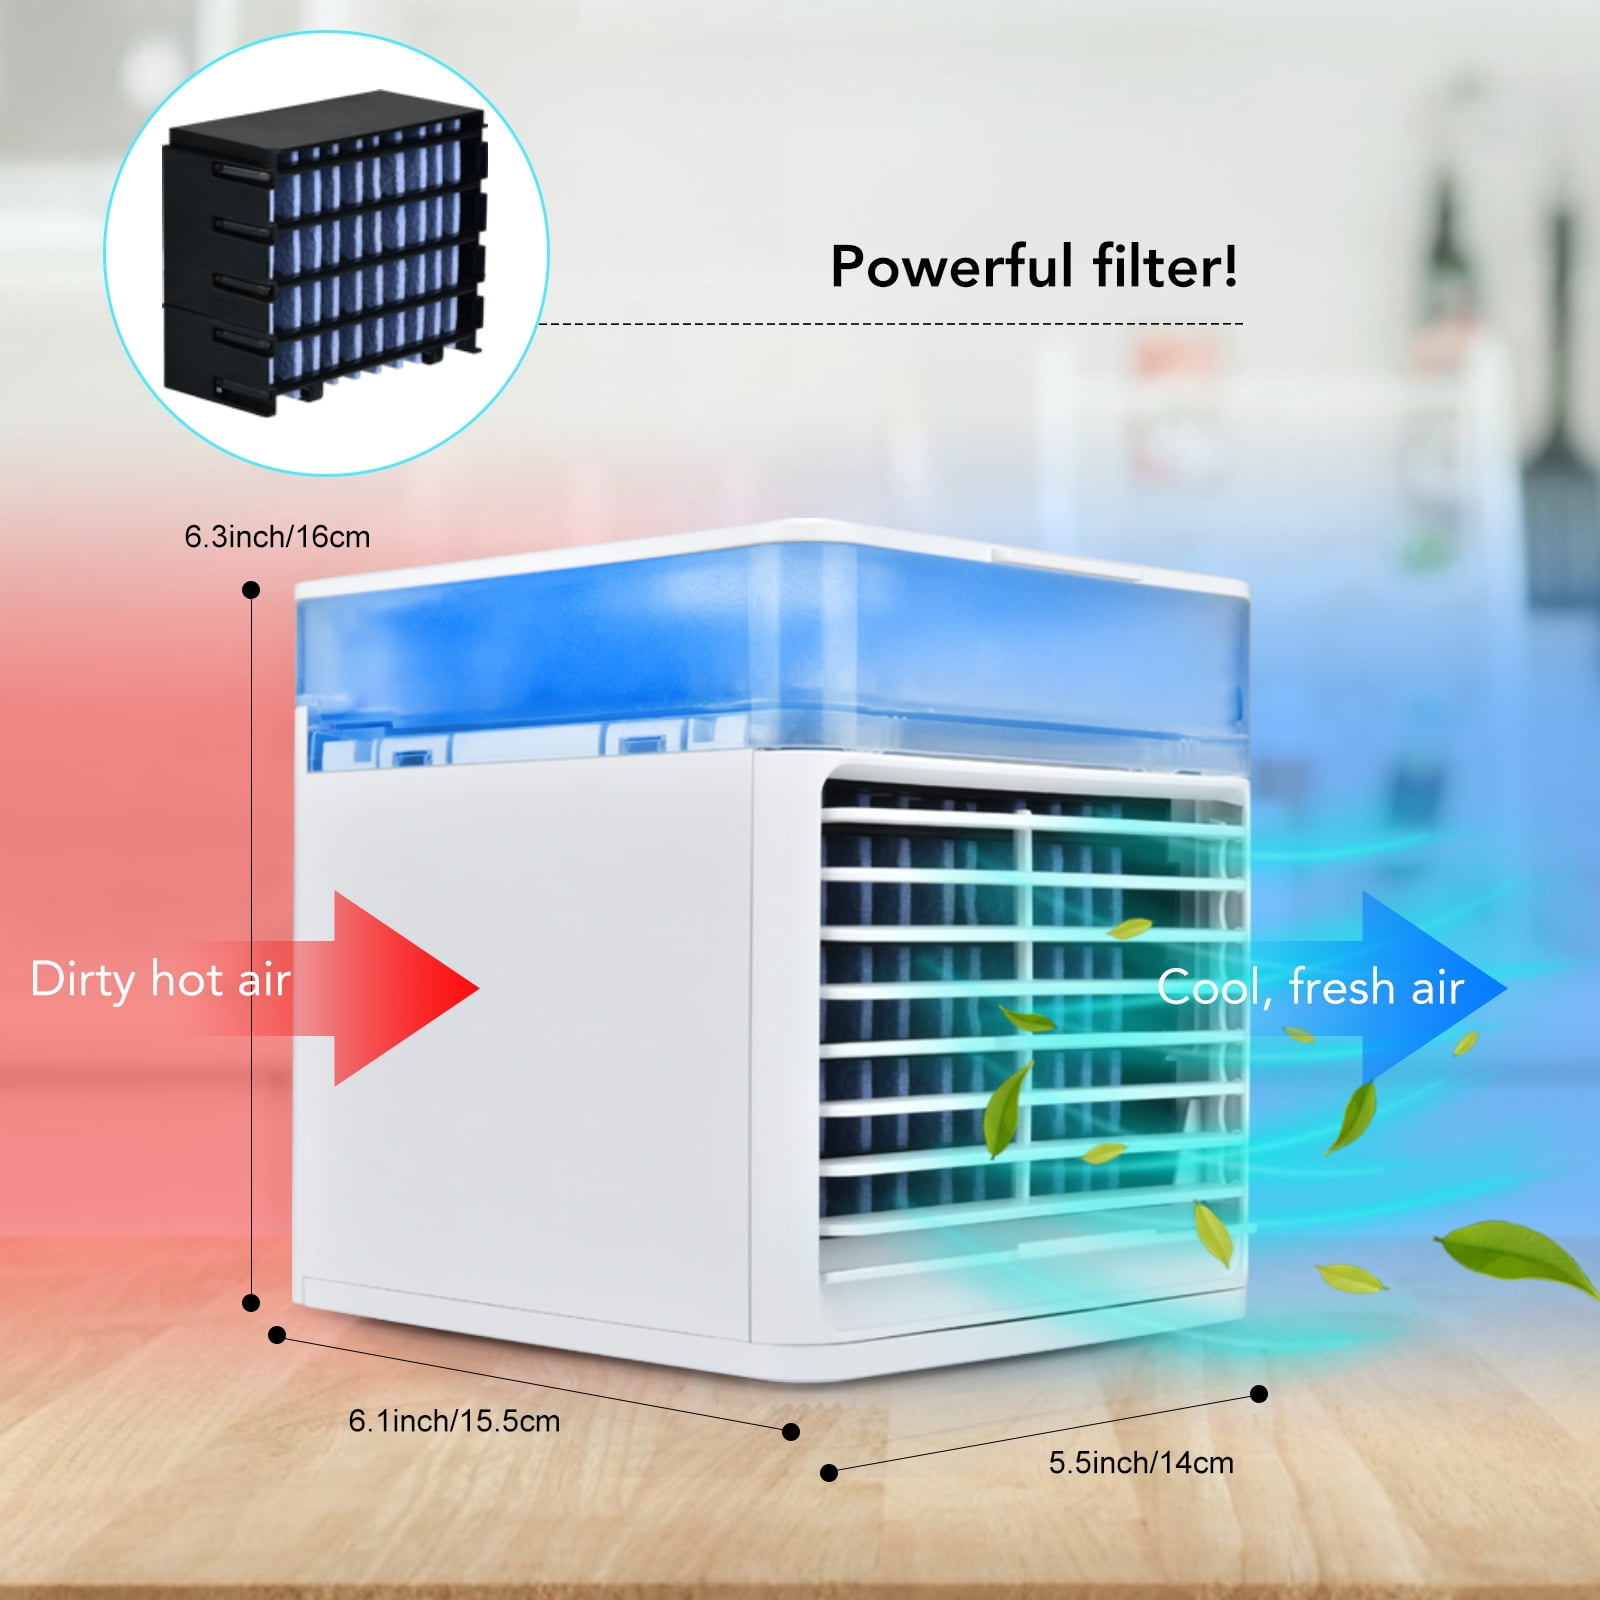 Portable Air Cooler,TKLake Personal Mini Air Conditioner,4 in 1 Air Conditioner Fan,Evaporative Coolers Purifier,Humidifier with USB,2 Models 3 Speeds Desktop Cooling Fan Perfect for Home,Office,Dorm 